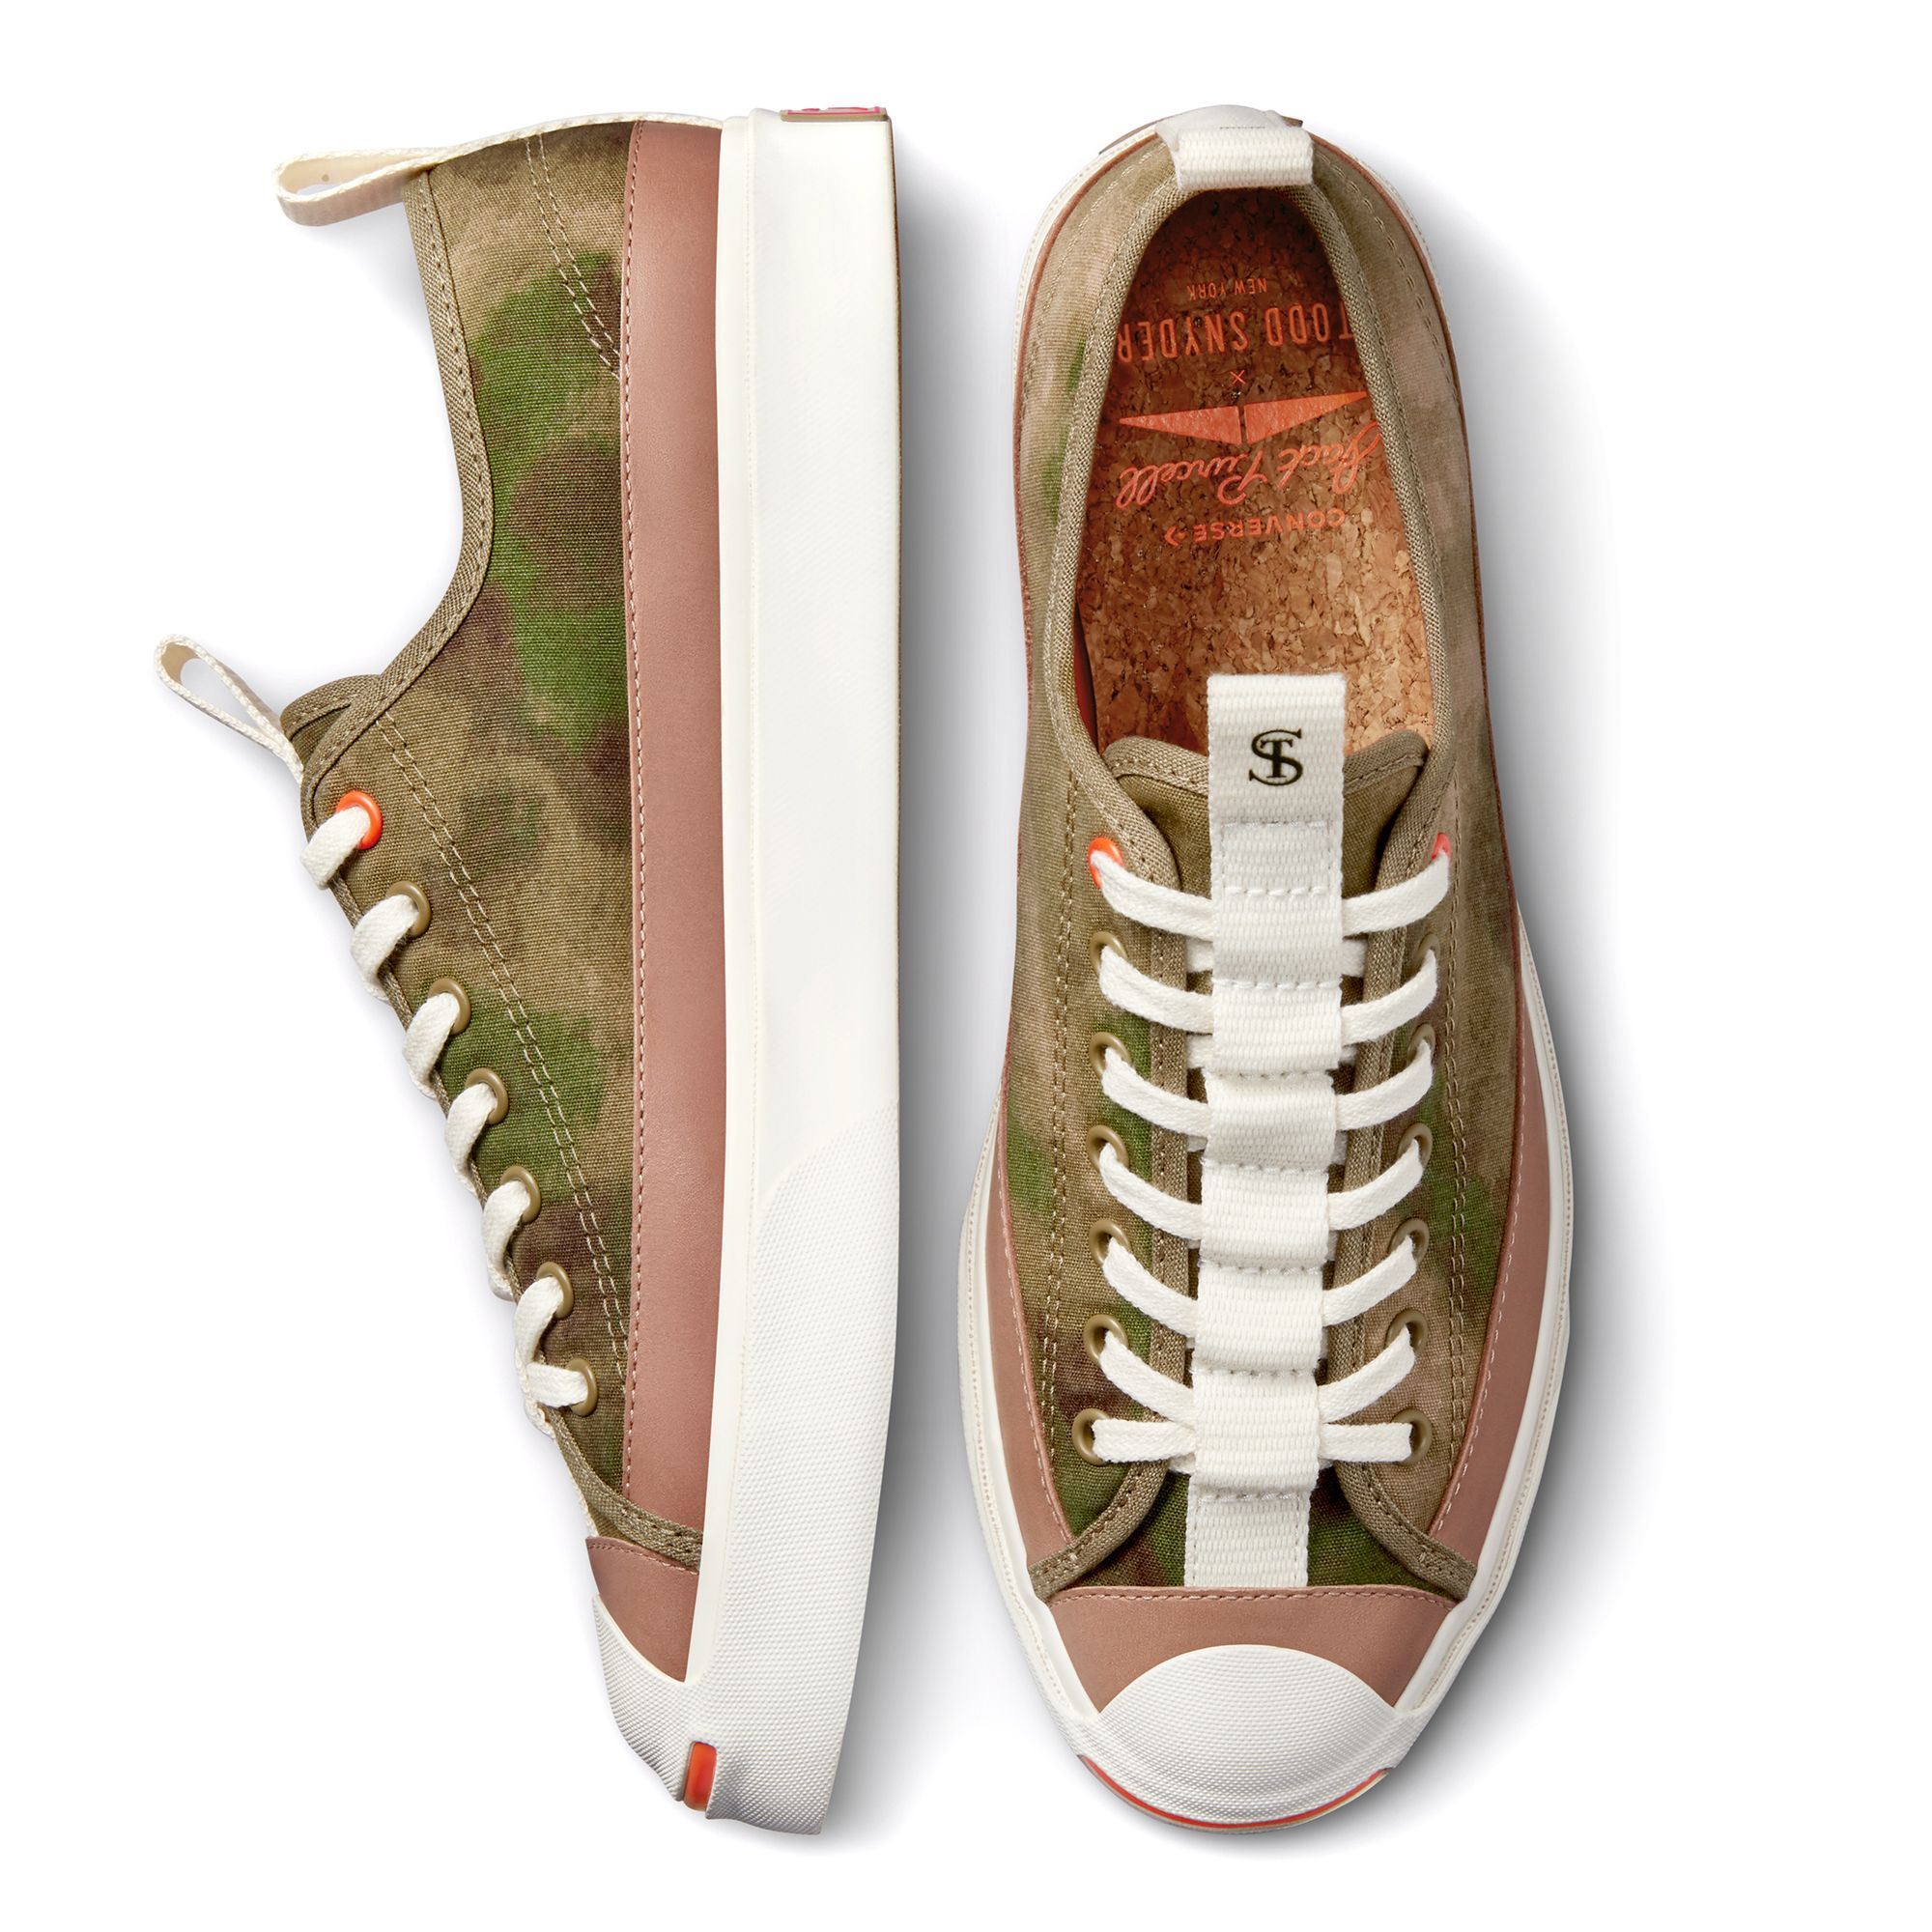 Converse X Todd Snyder Jack Purcell